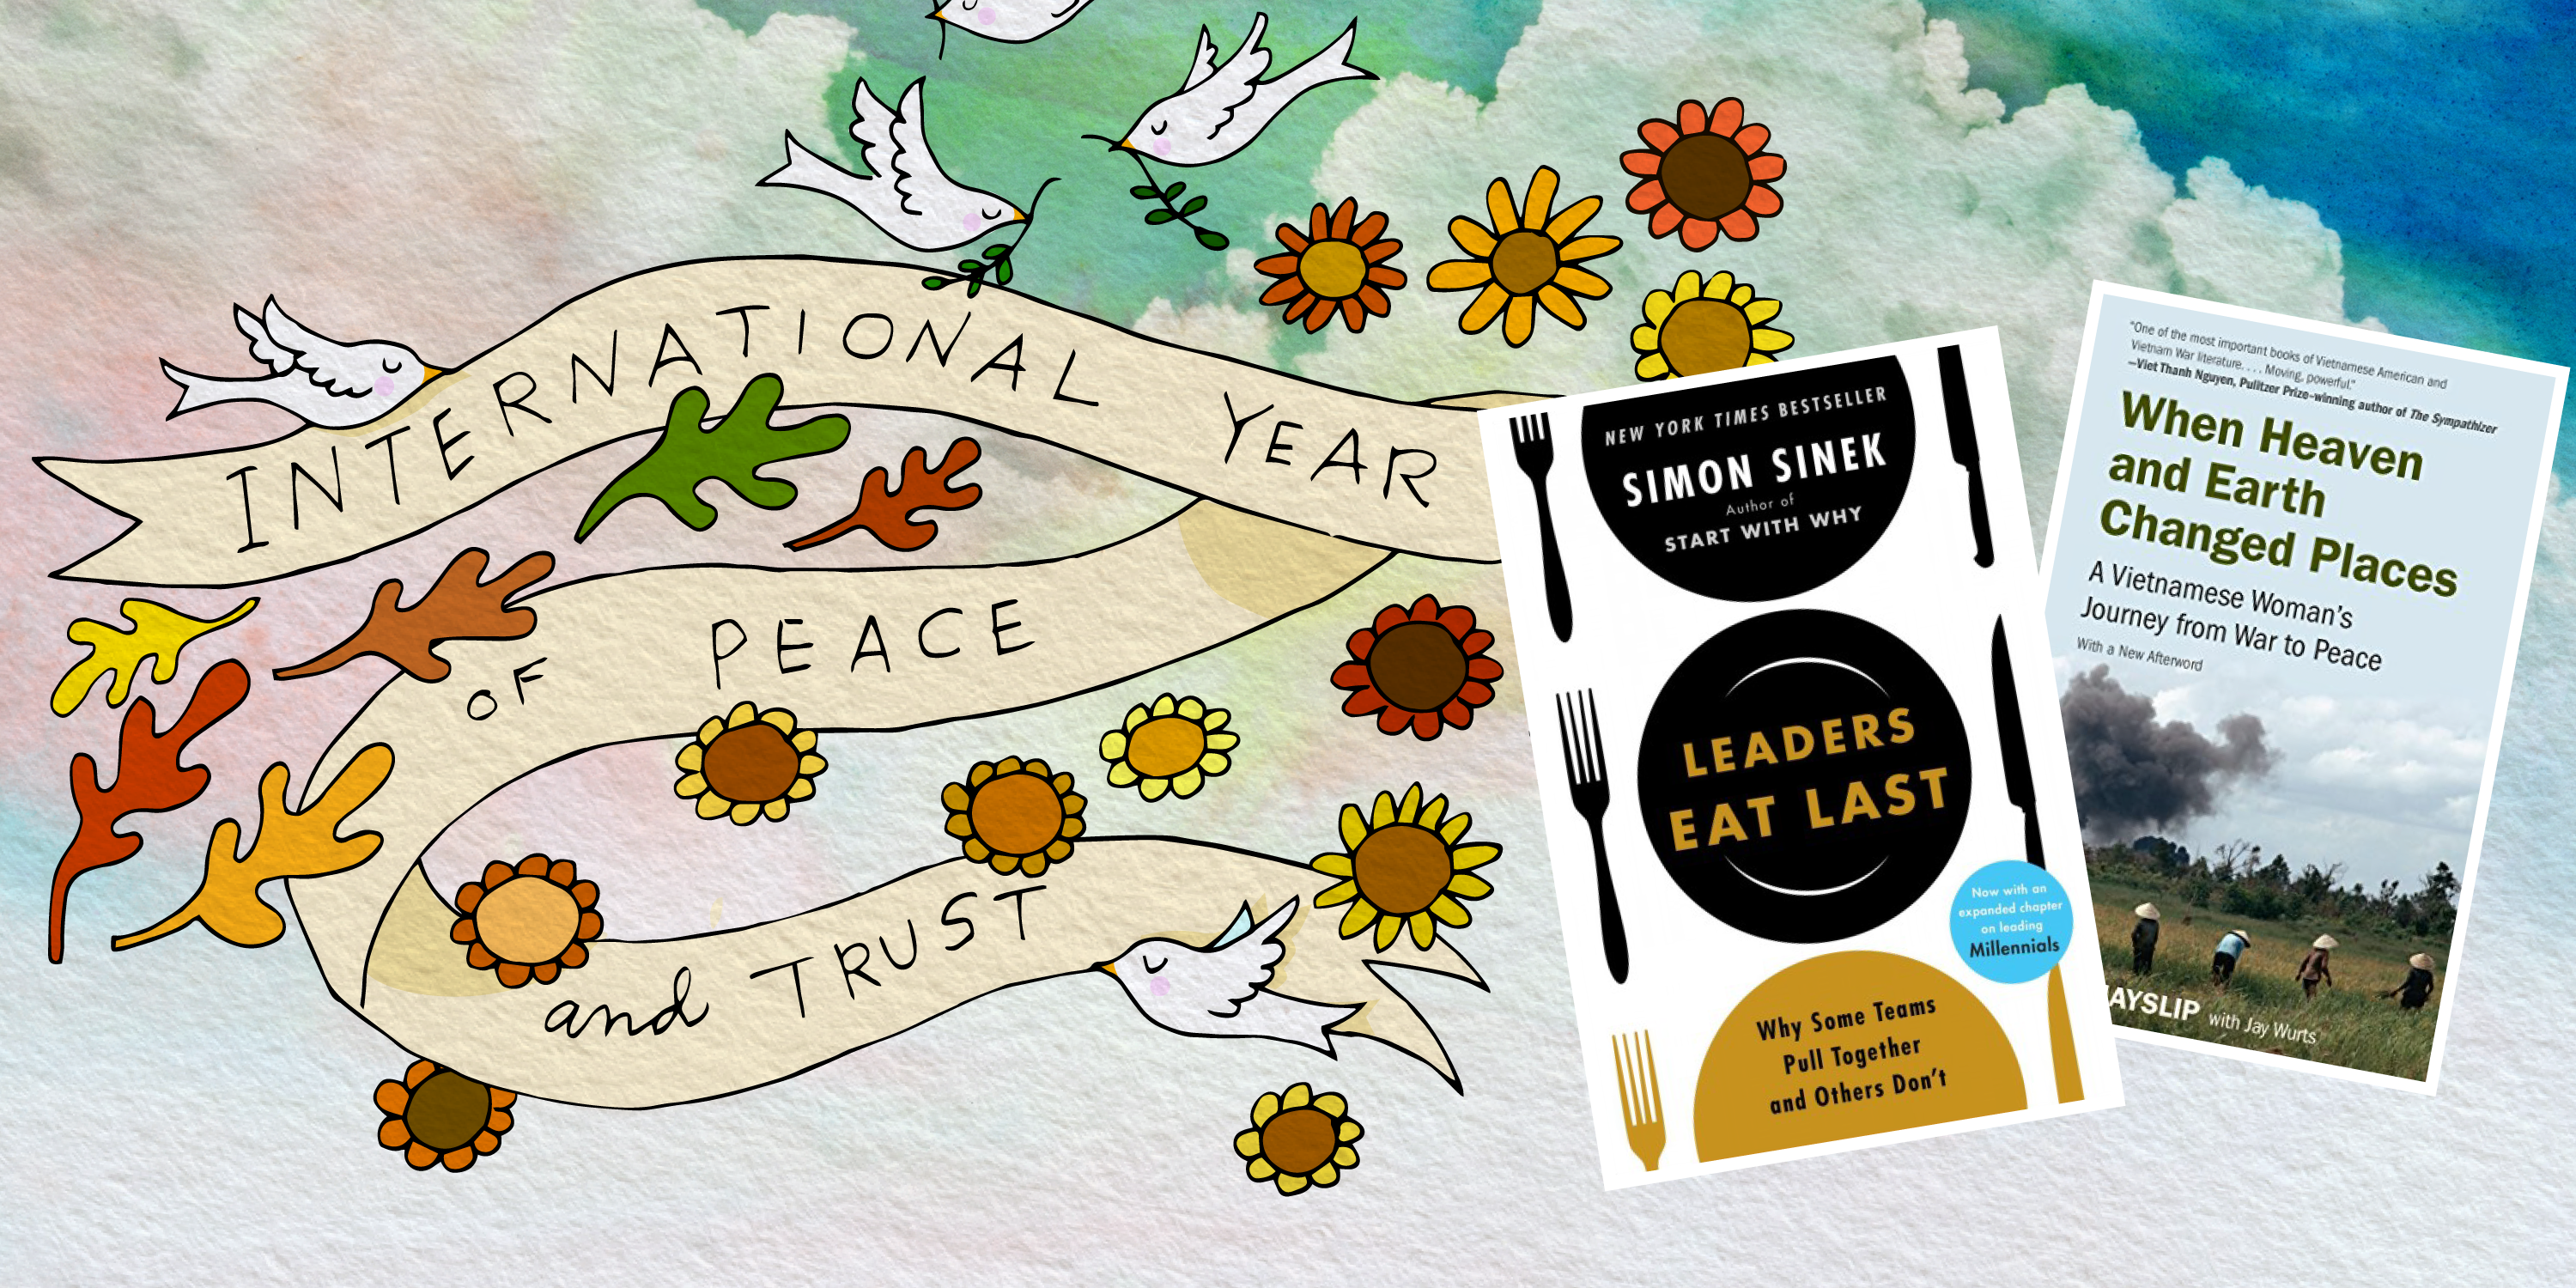 International Year of Peace and Trust: Leaders Eat Last & When Heaven and Earth Changed Places